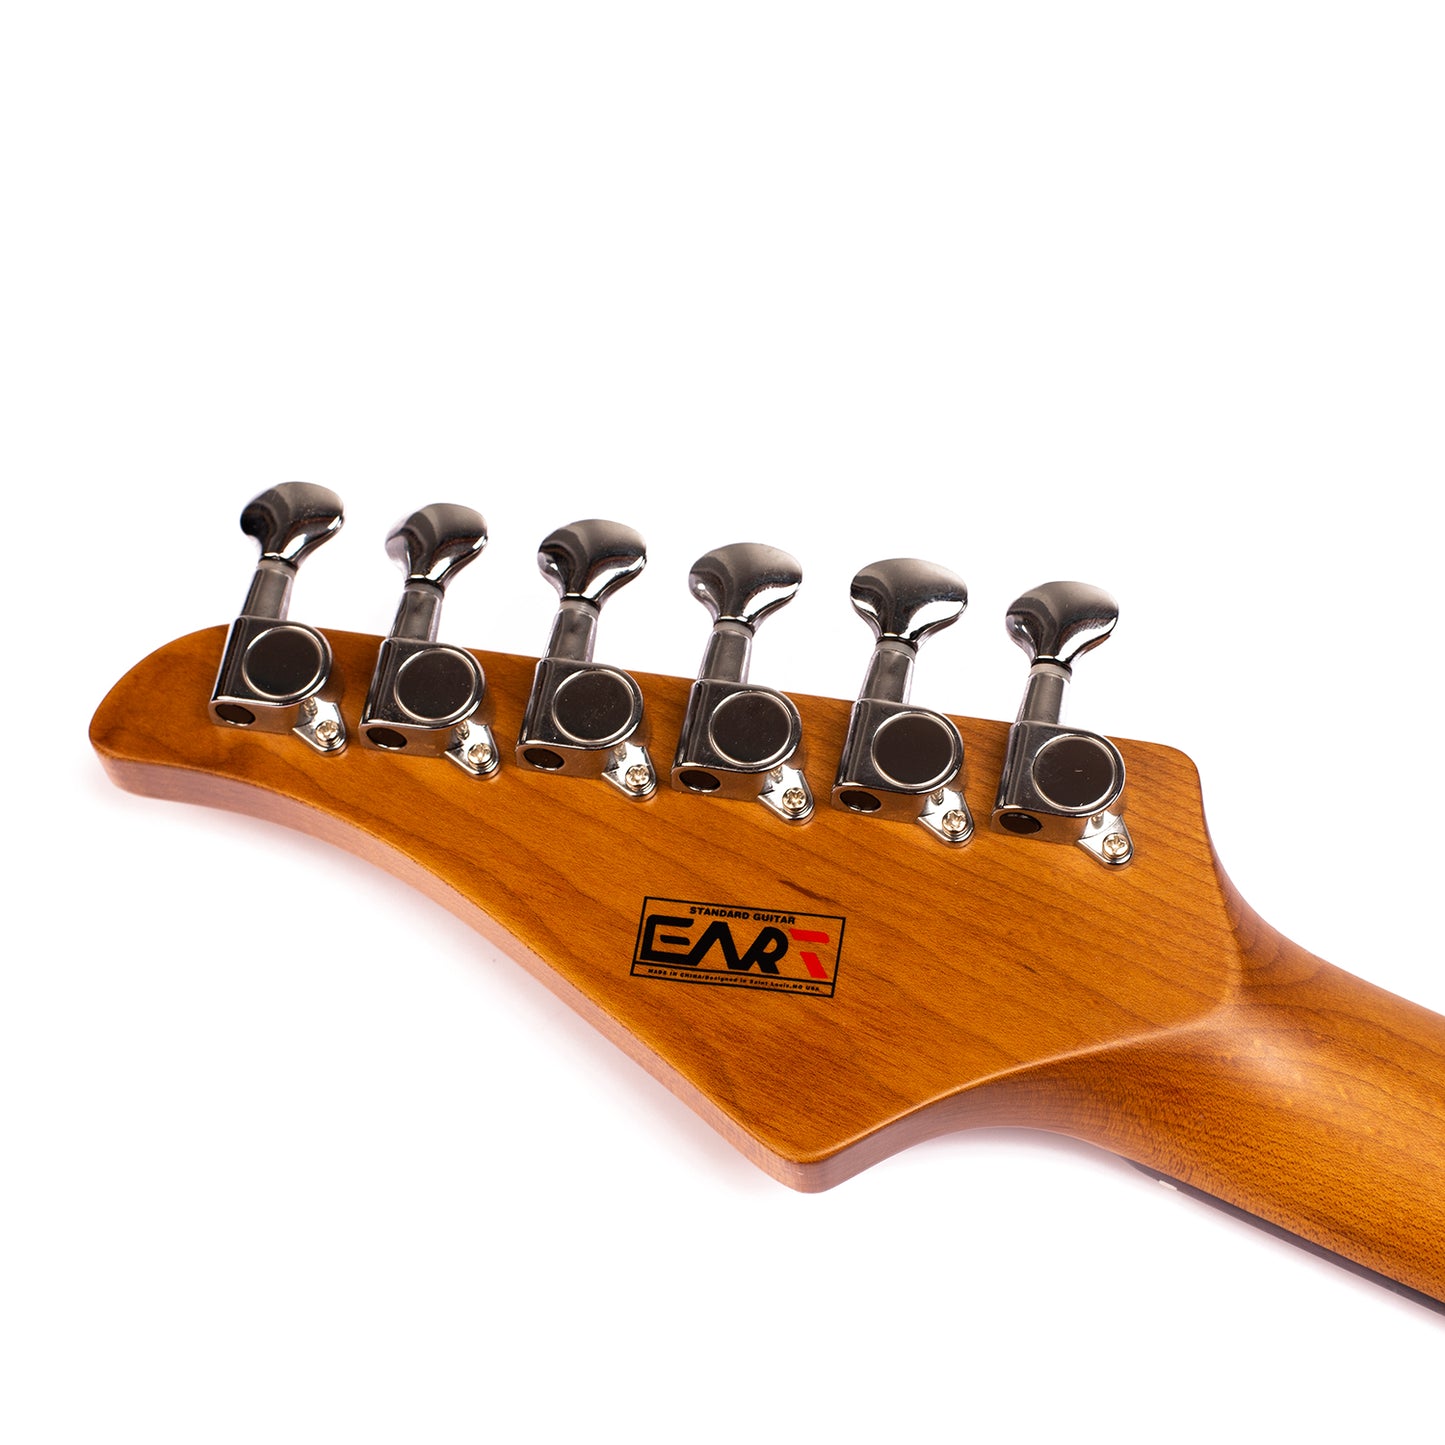 EART electric guitar YMX-SG3 SSS headstock back